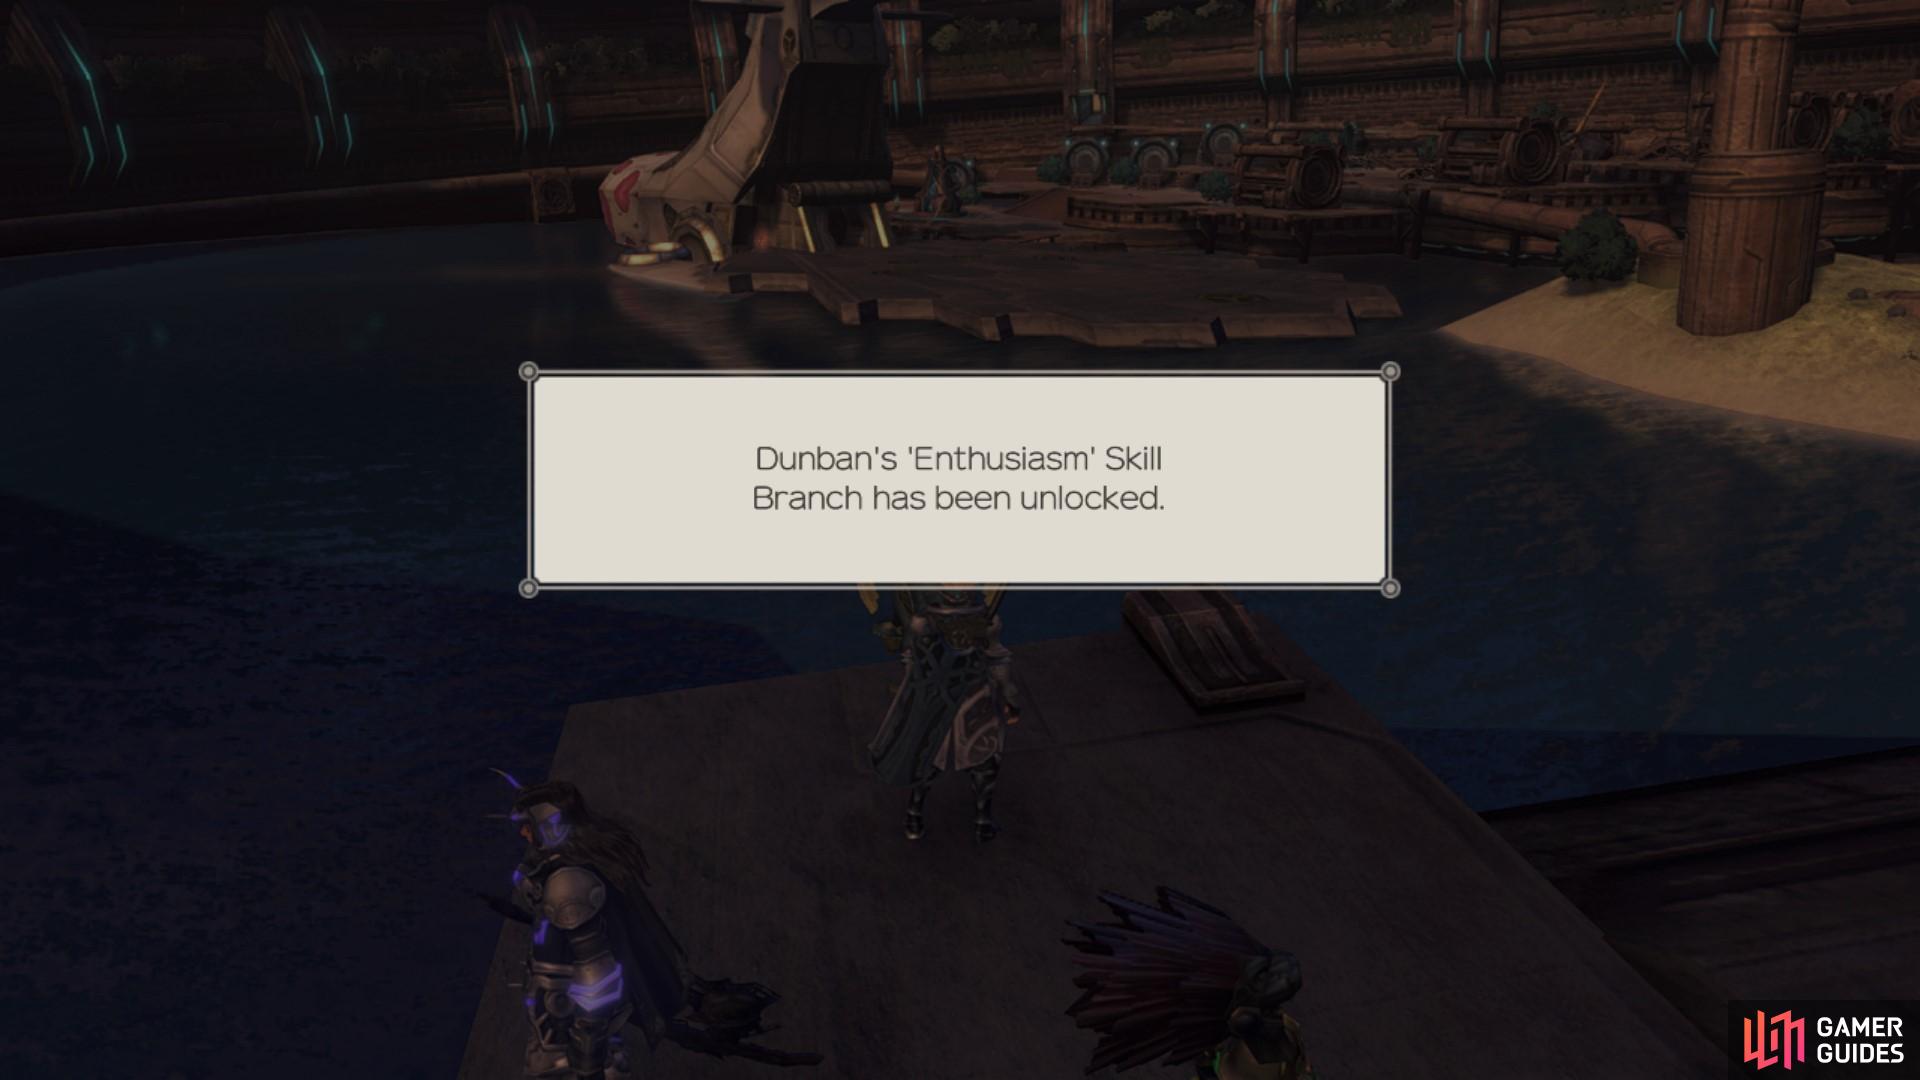 Completing the quest unlocks Dunban's fifth skill branch, Enthusiasm.